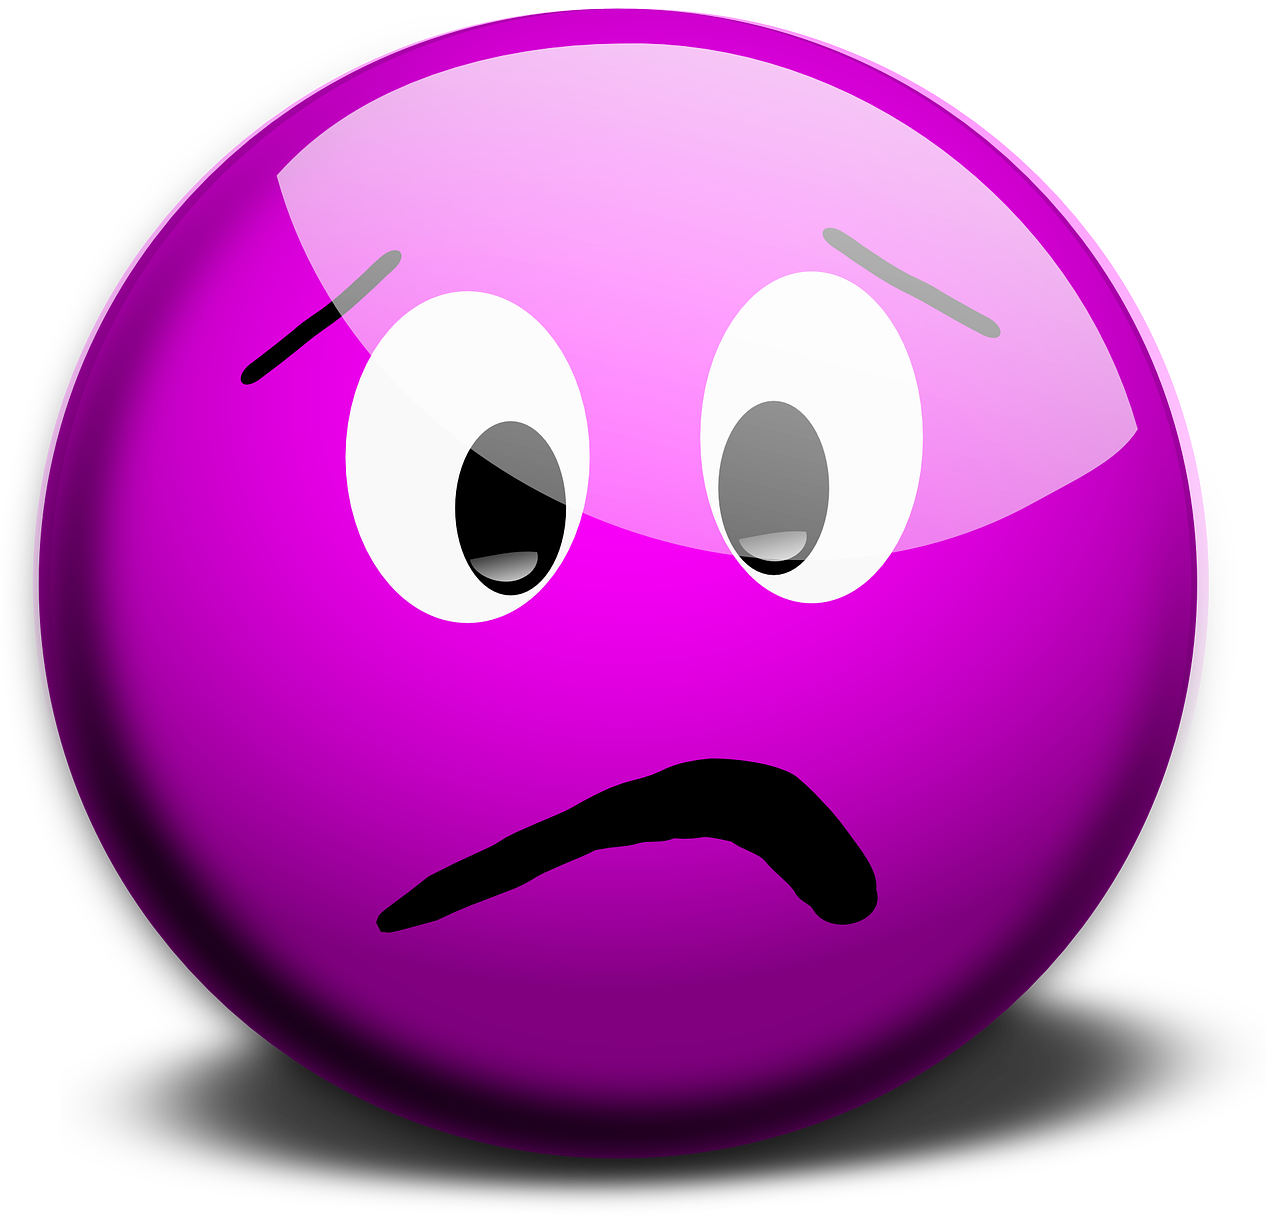 a purple ball with a sad face on it, a picture, pixabay, mingei, no gradients, !dramatic !face, labile temper, cooky